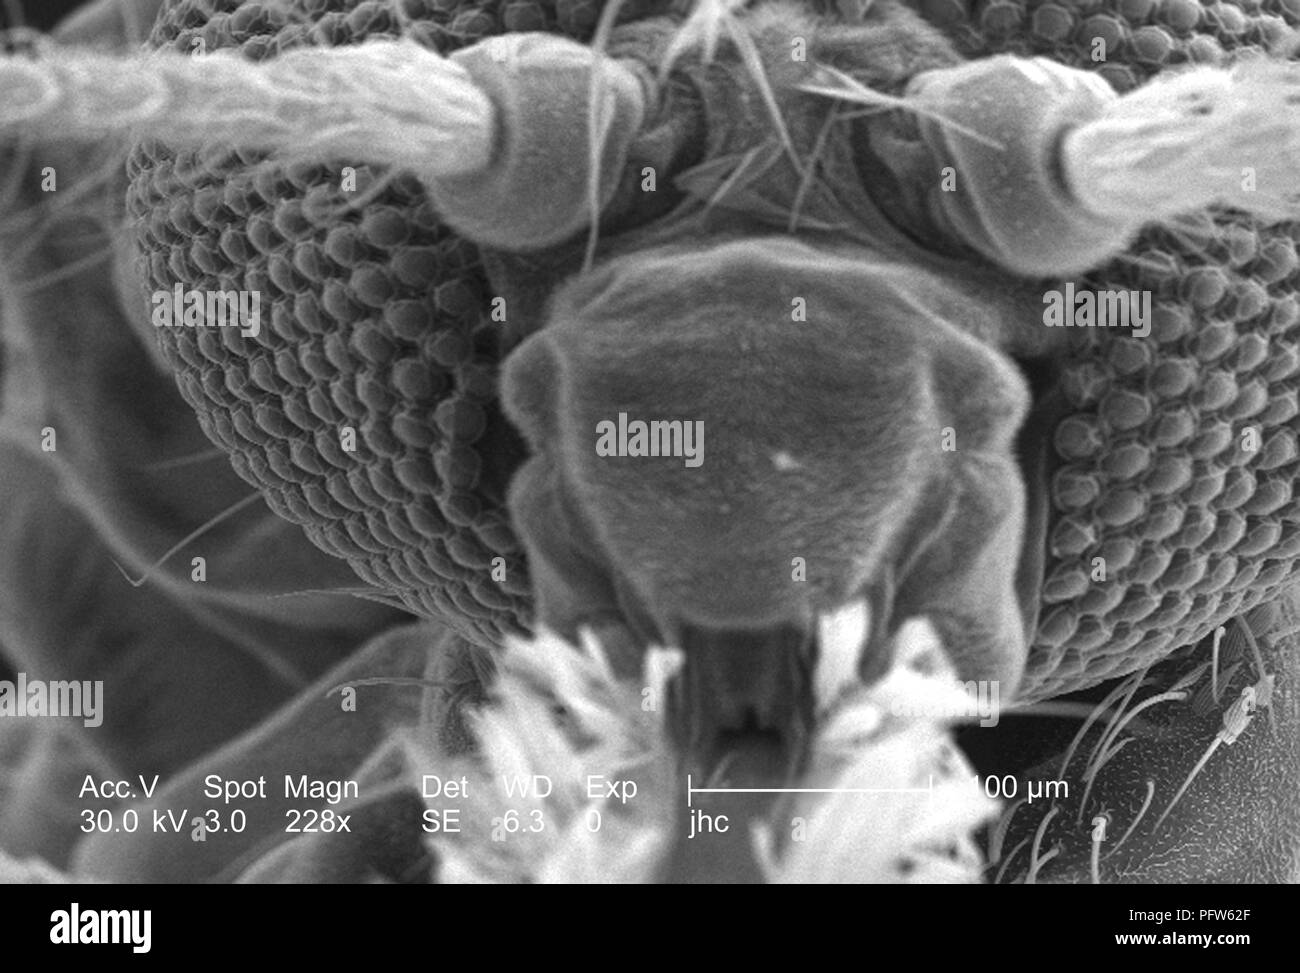 Morphologic features on the exoskeletal surface of an Anopheles gambiae mosquito's anterior head region, revealed in the 228x magnified scanning electron microscopic (SEM) image, 2006. Image courtesy Centers for Disease Control (CDC) / Paul Howell. () Stock Photo